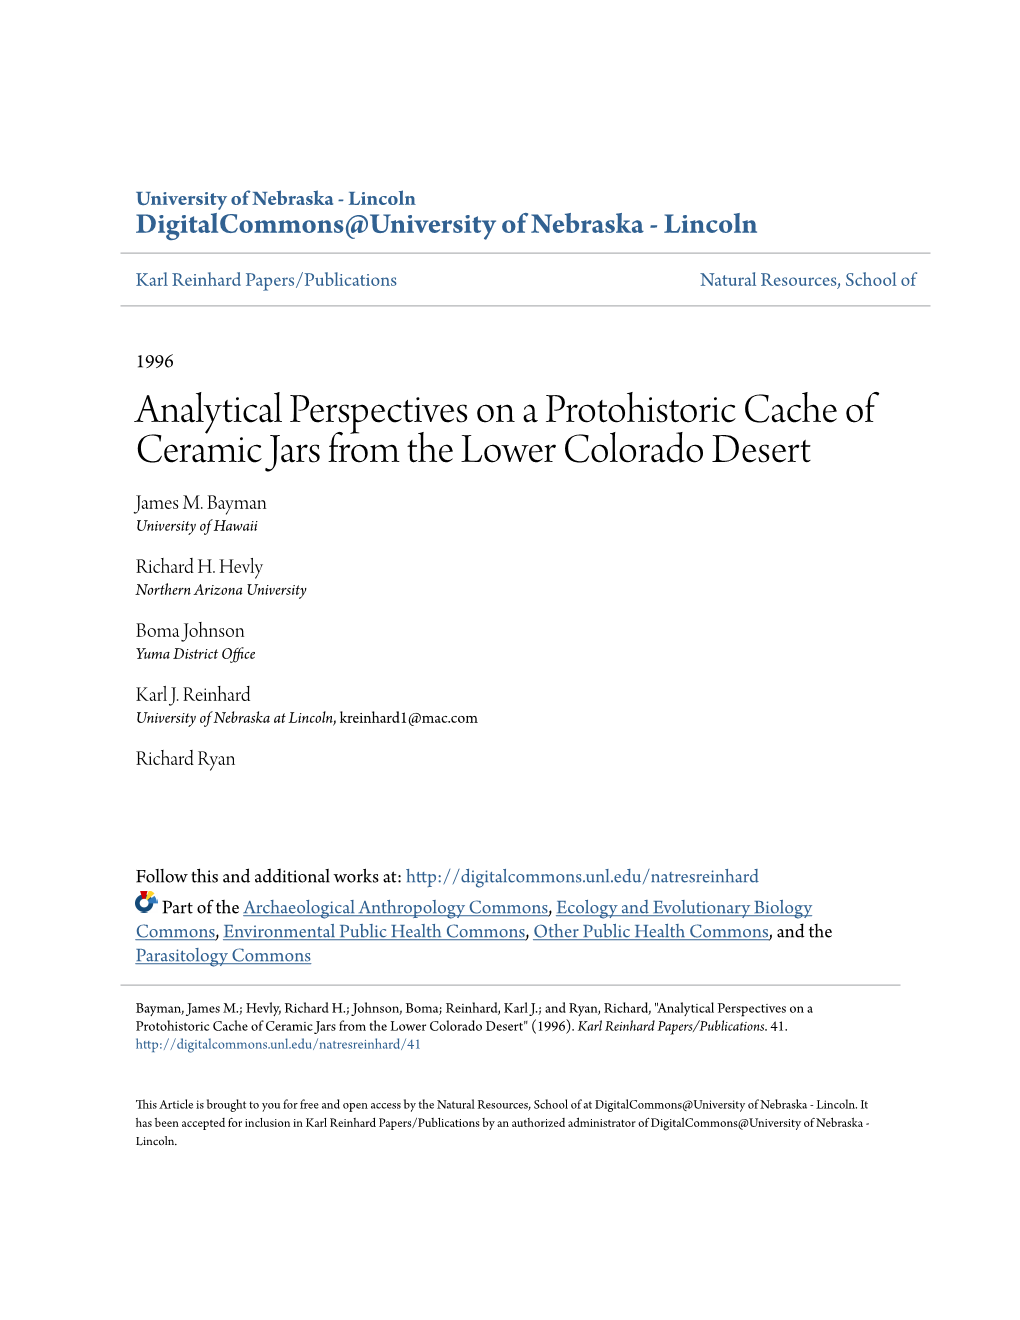 Analytical Perspectives on a Protohistoric Cache of Ceramic Jars from the Lower Colorado Desert James M